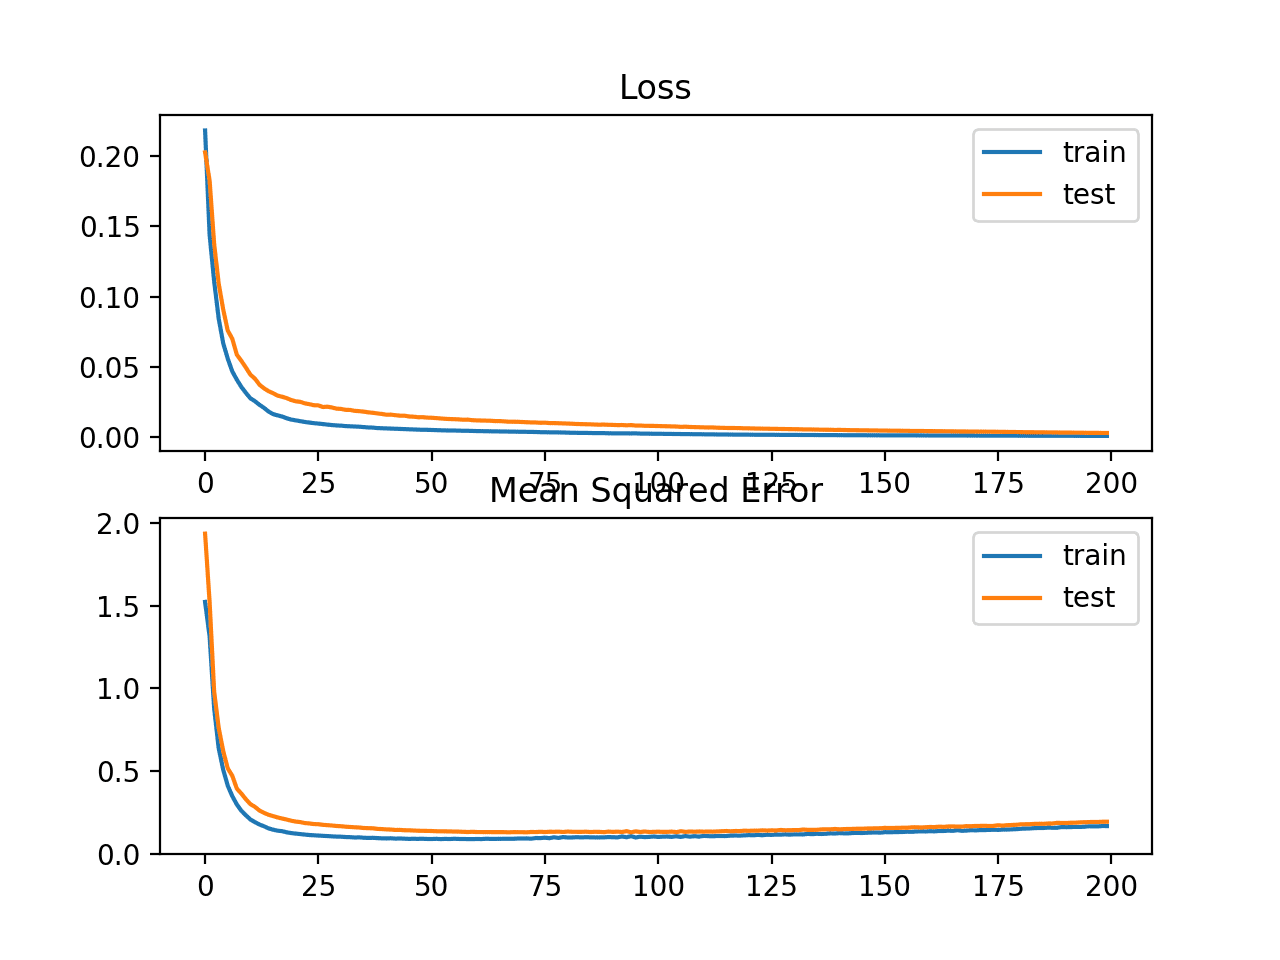 Line Plots of Mean Squared Logistic Error Loss and Mean Squared Error Over Training Epochs